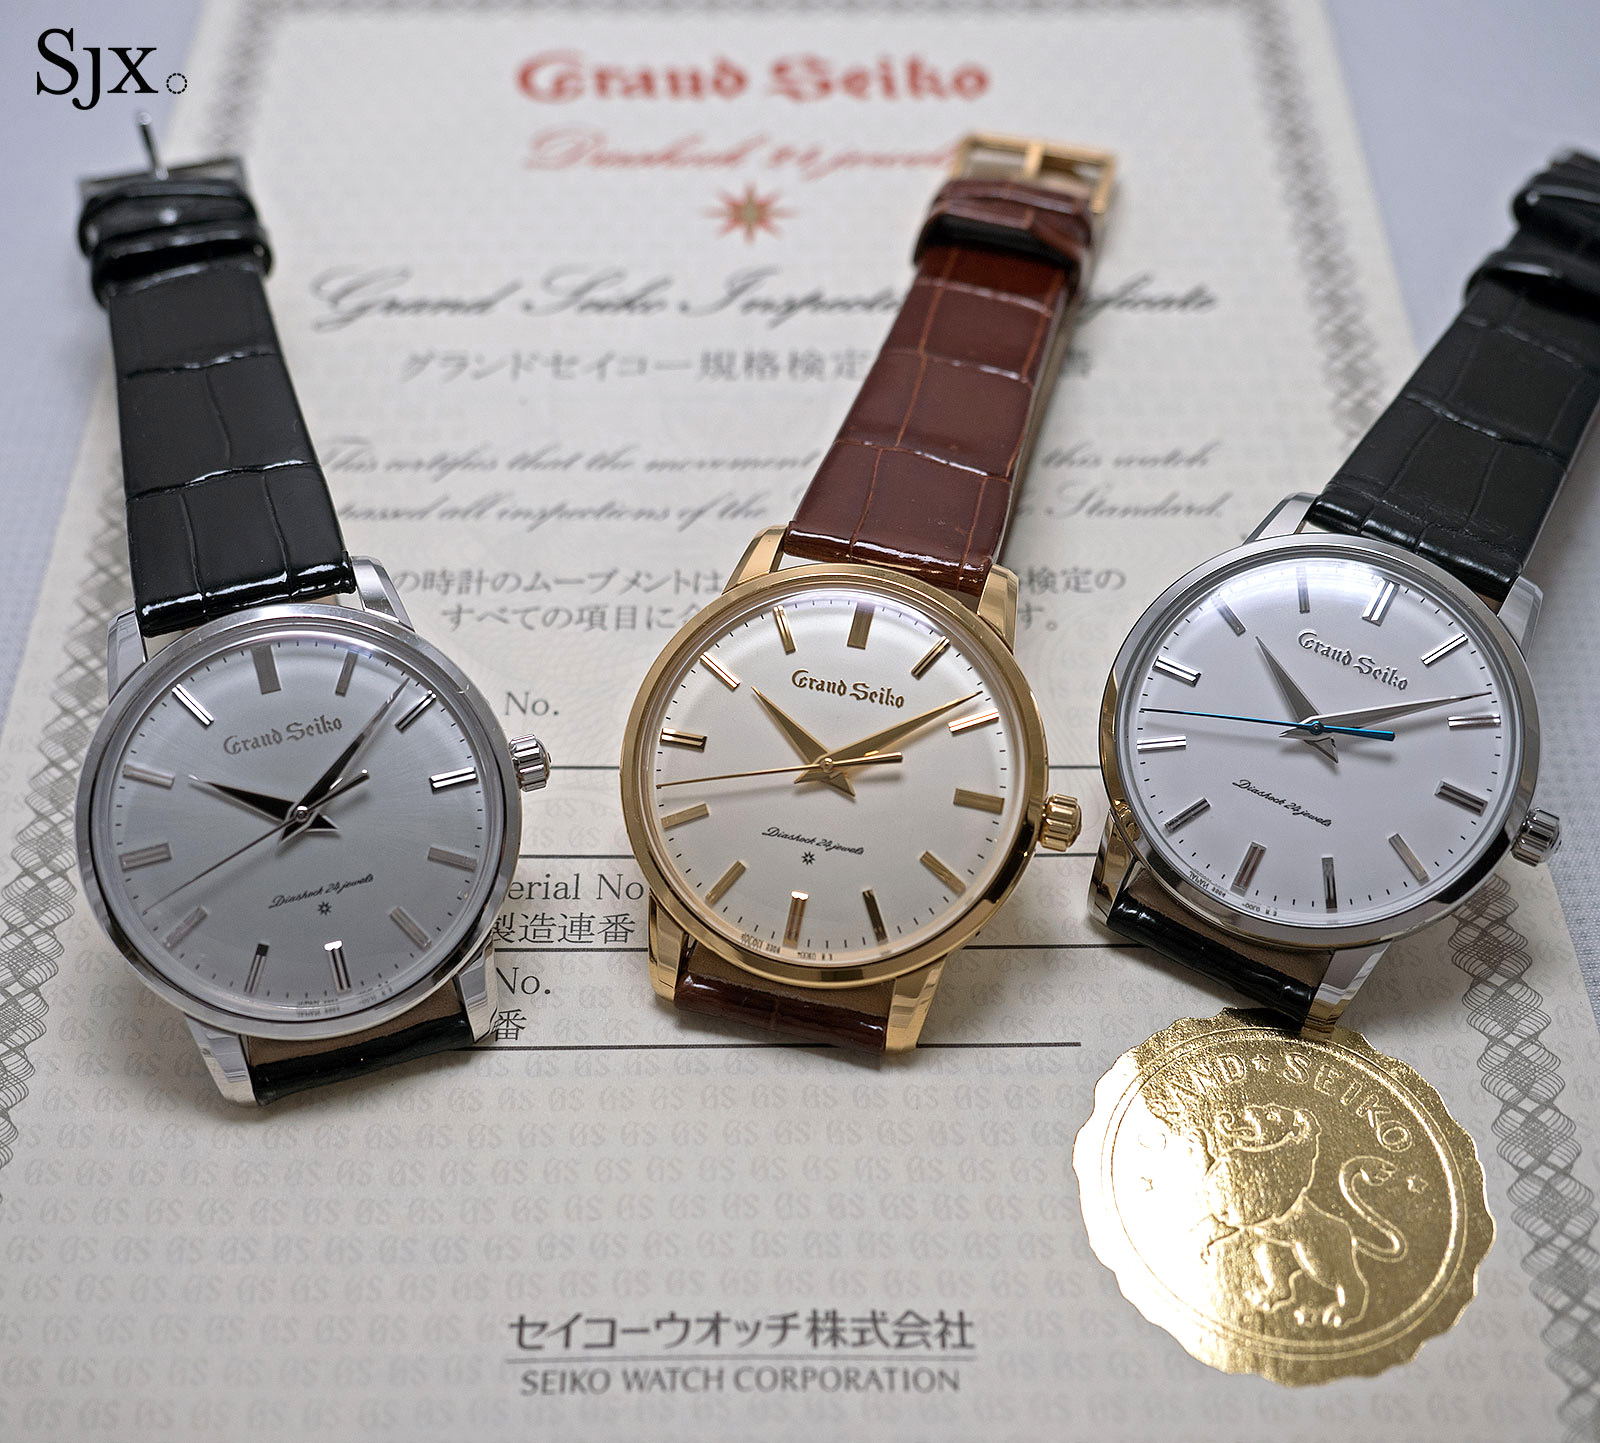 Hands-On with the Grand Seiko SBGW251, SBGW2512, SBGW253, Reissue of 1960's  Ref. 3180 | SJX Watches